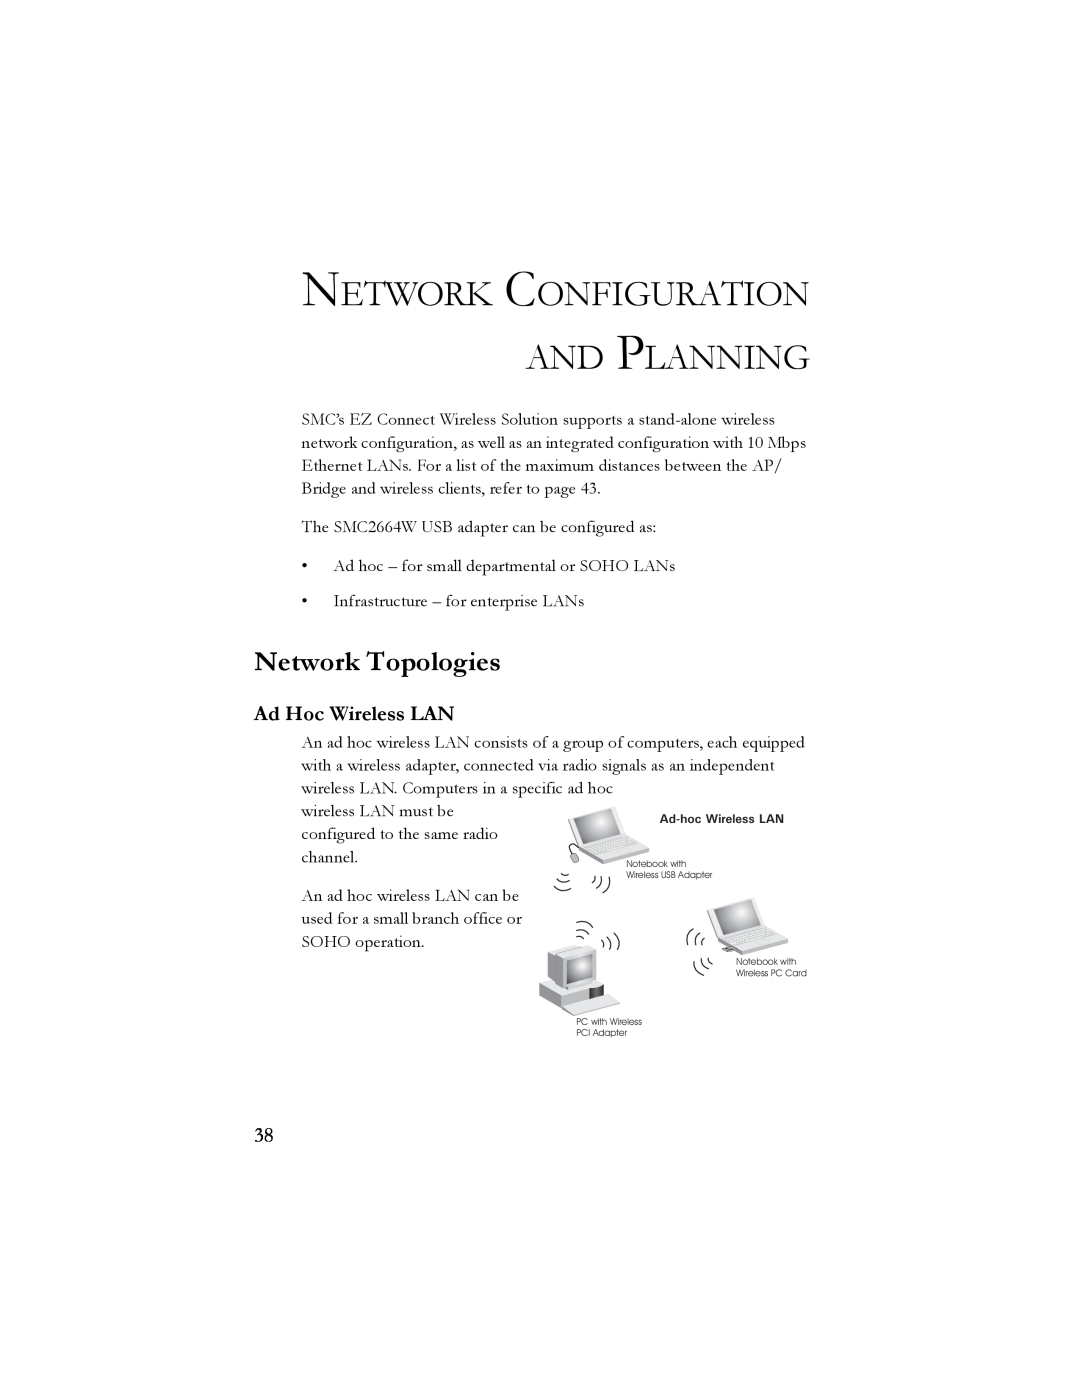 SMC Networks SMC2664W manual Network Configuration And Planning, Network Topologies, Ad Hoc Wireless LAN 